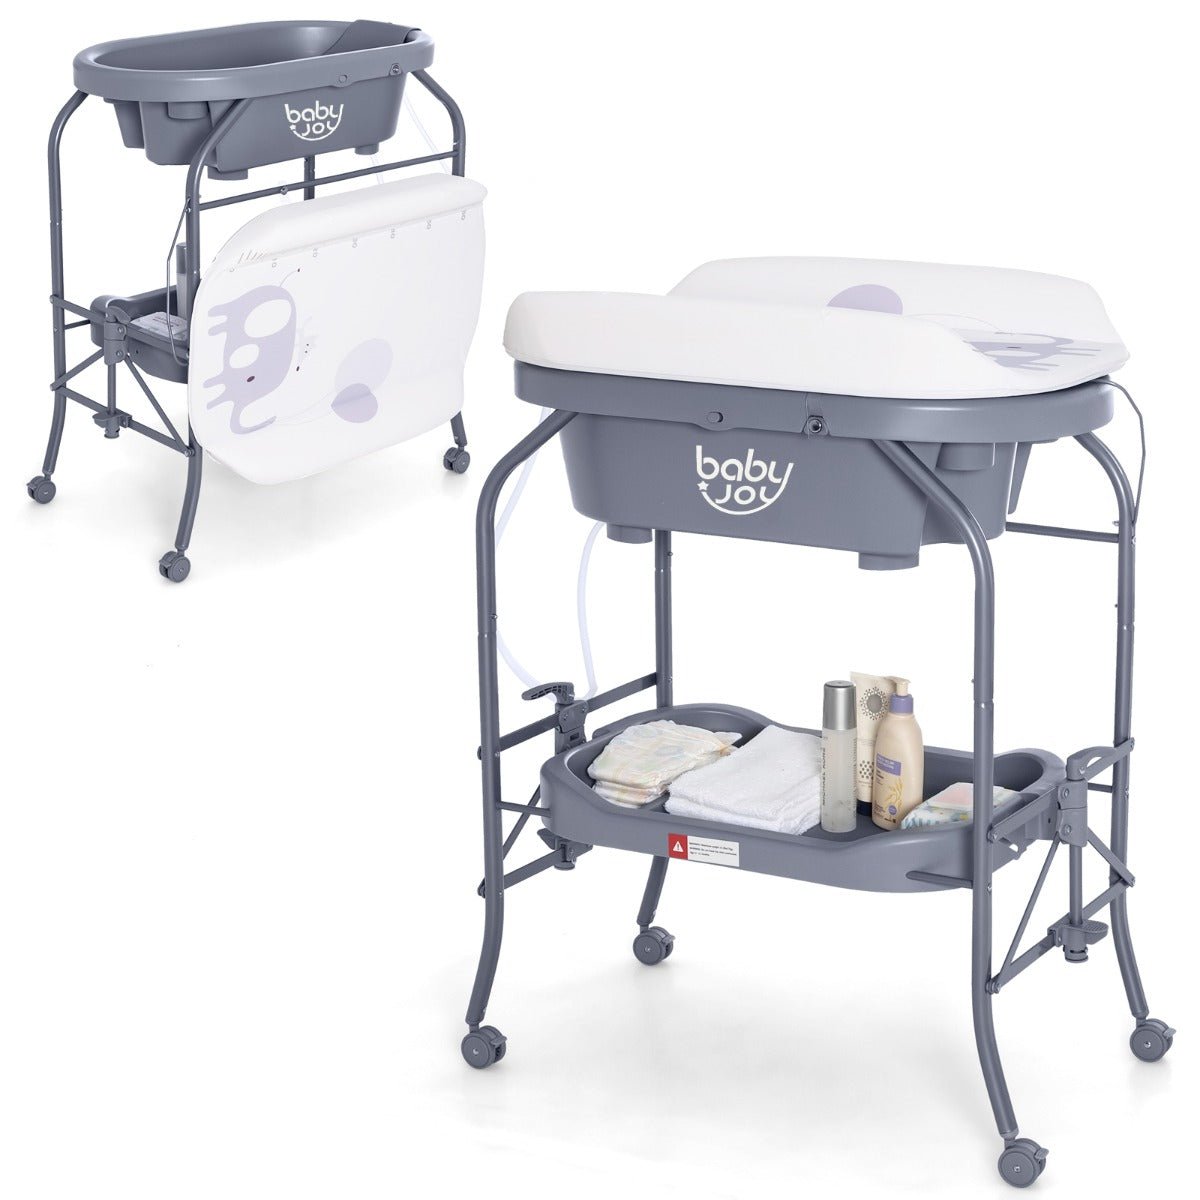 Rediscover Convenience with the 2 in 1 Baby Changing Table - Shop Today!